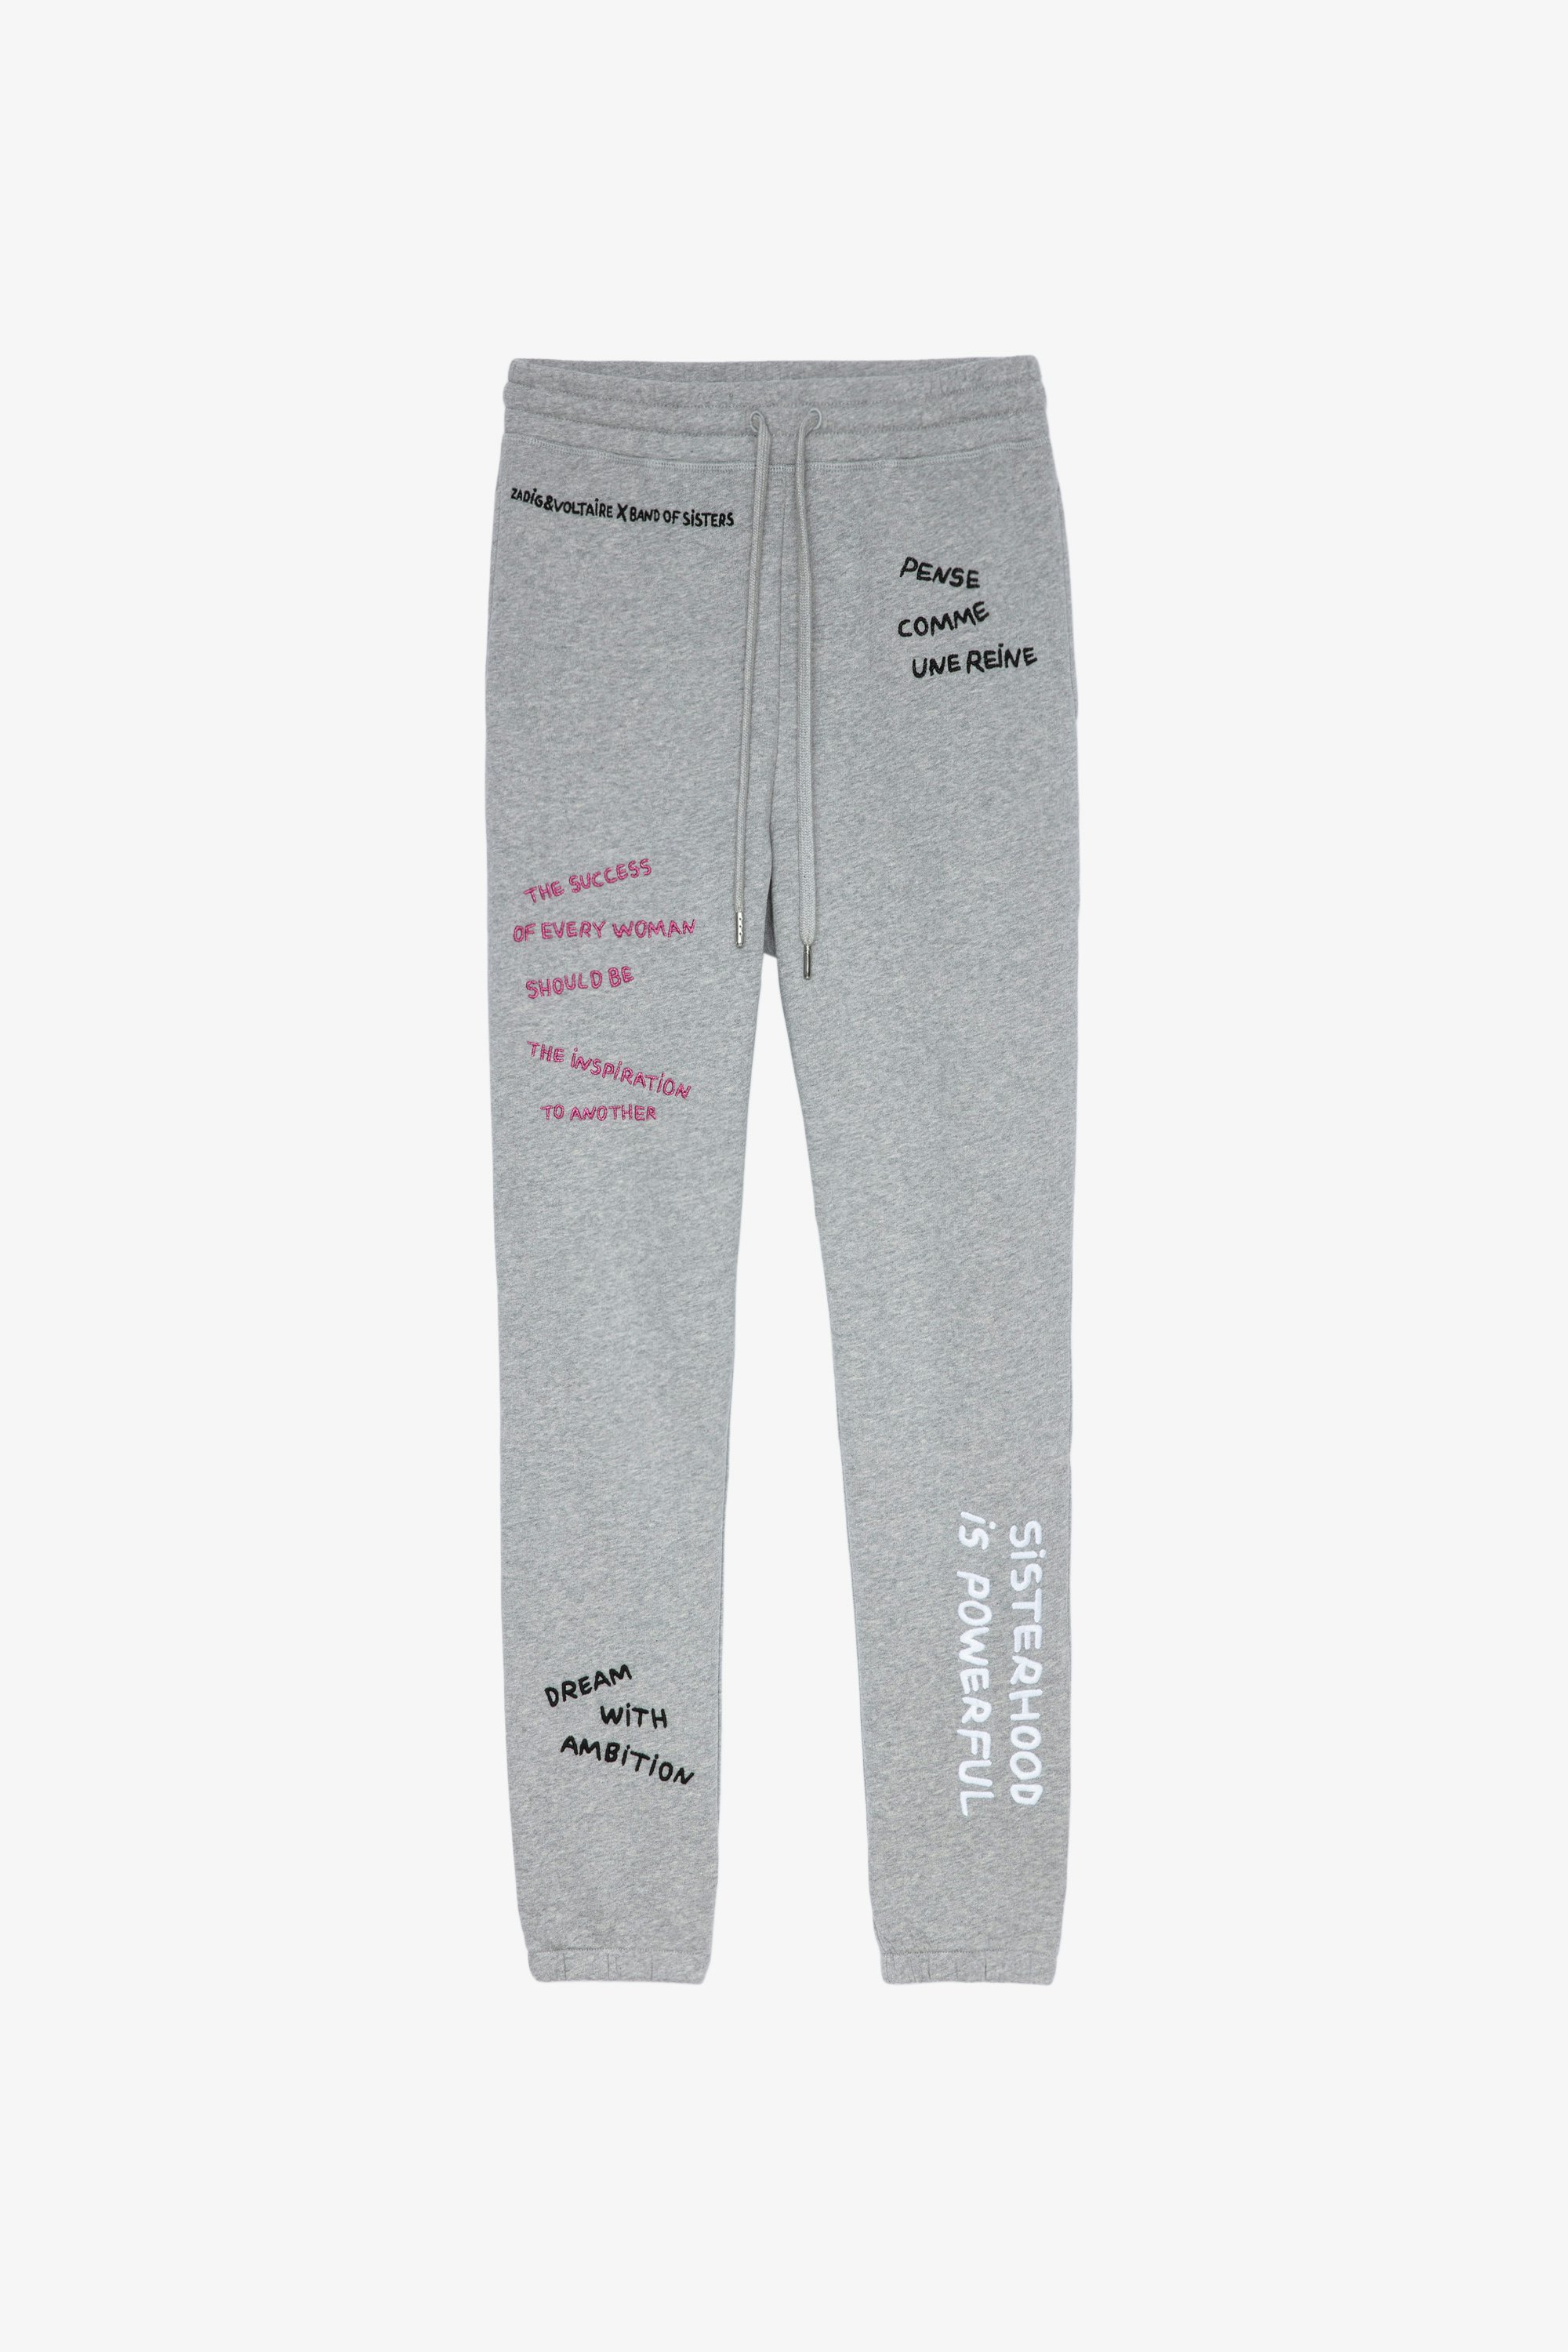 Band of Sisters Sofia Trousers Women’s grey marl cotton trousers with Band of Sisters inscriptions